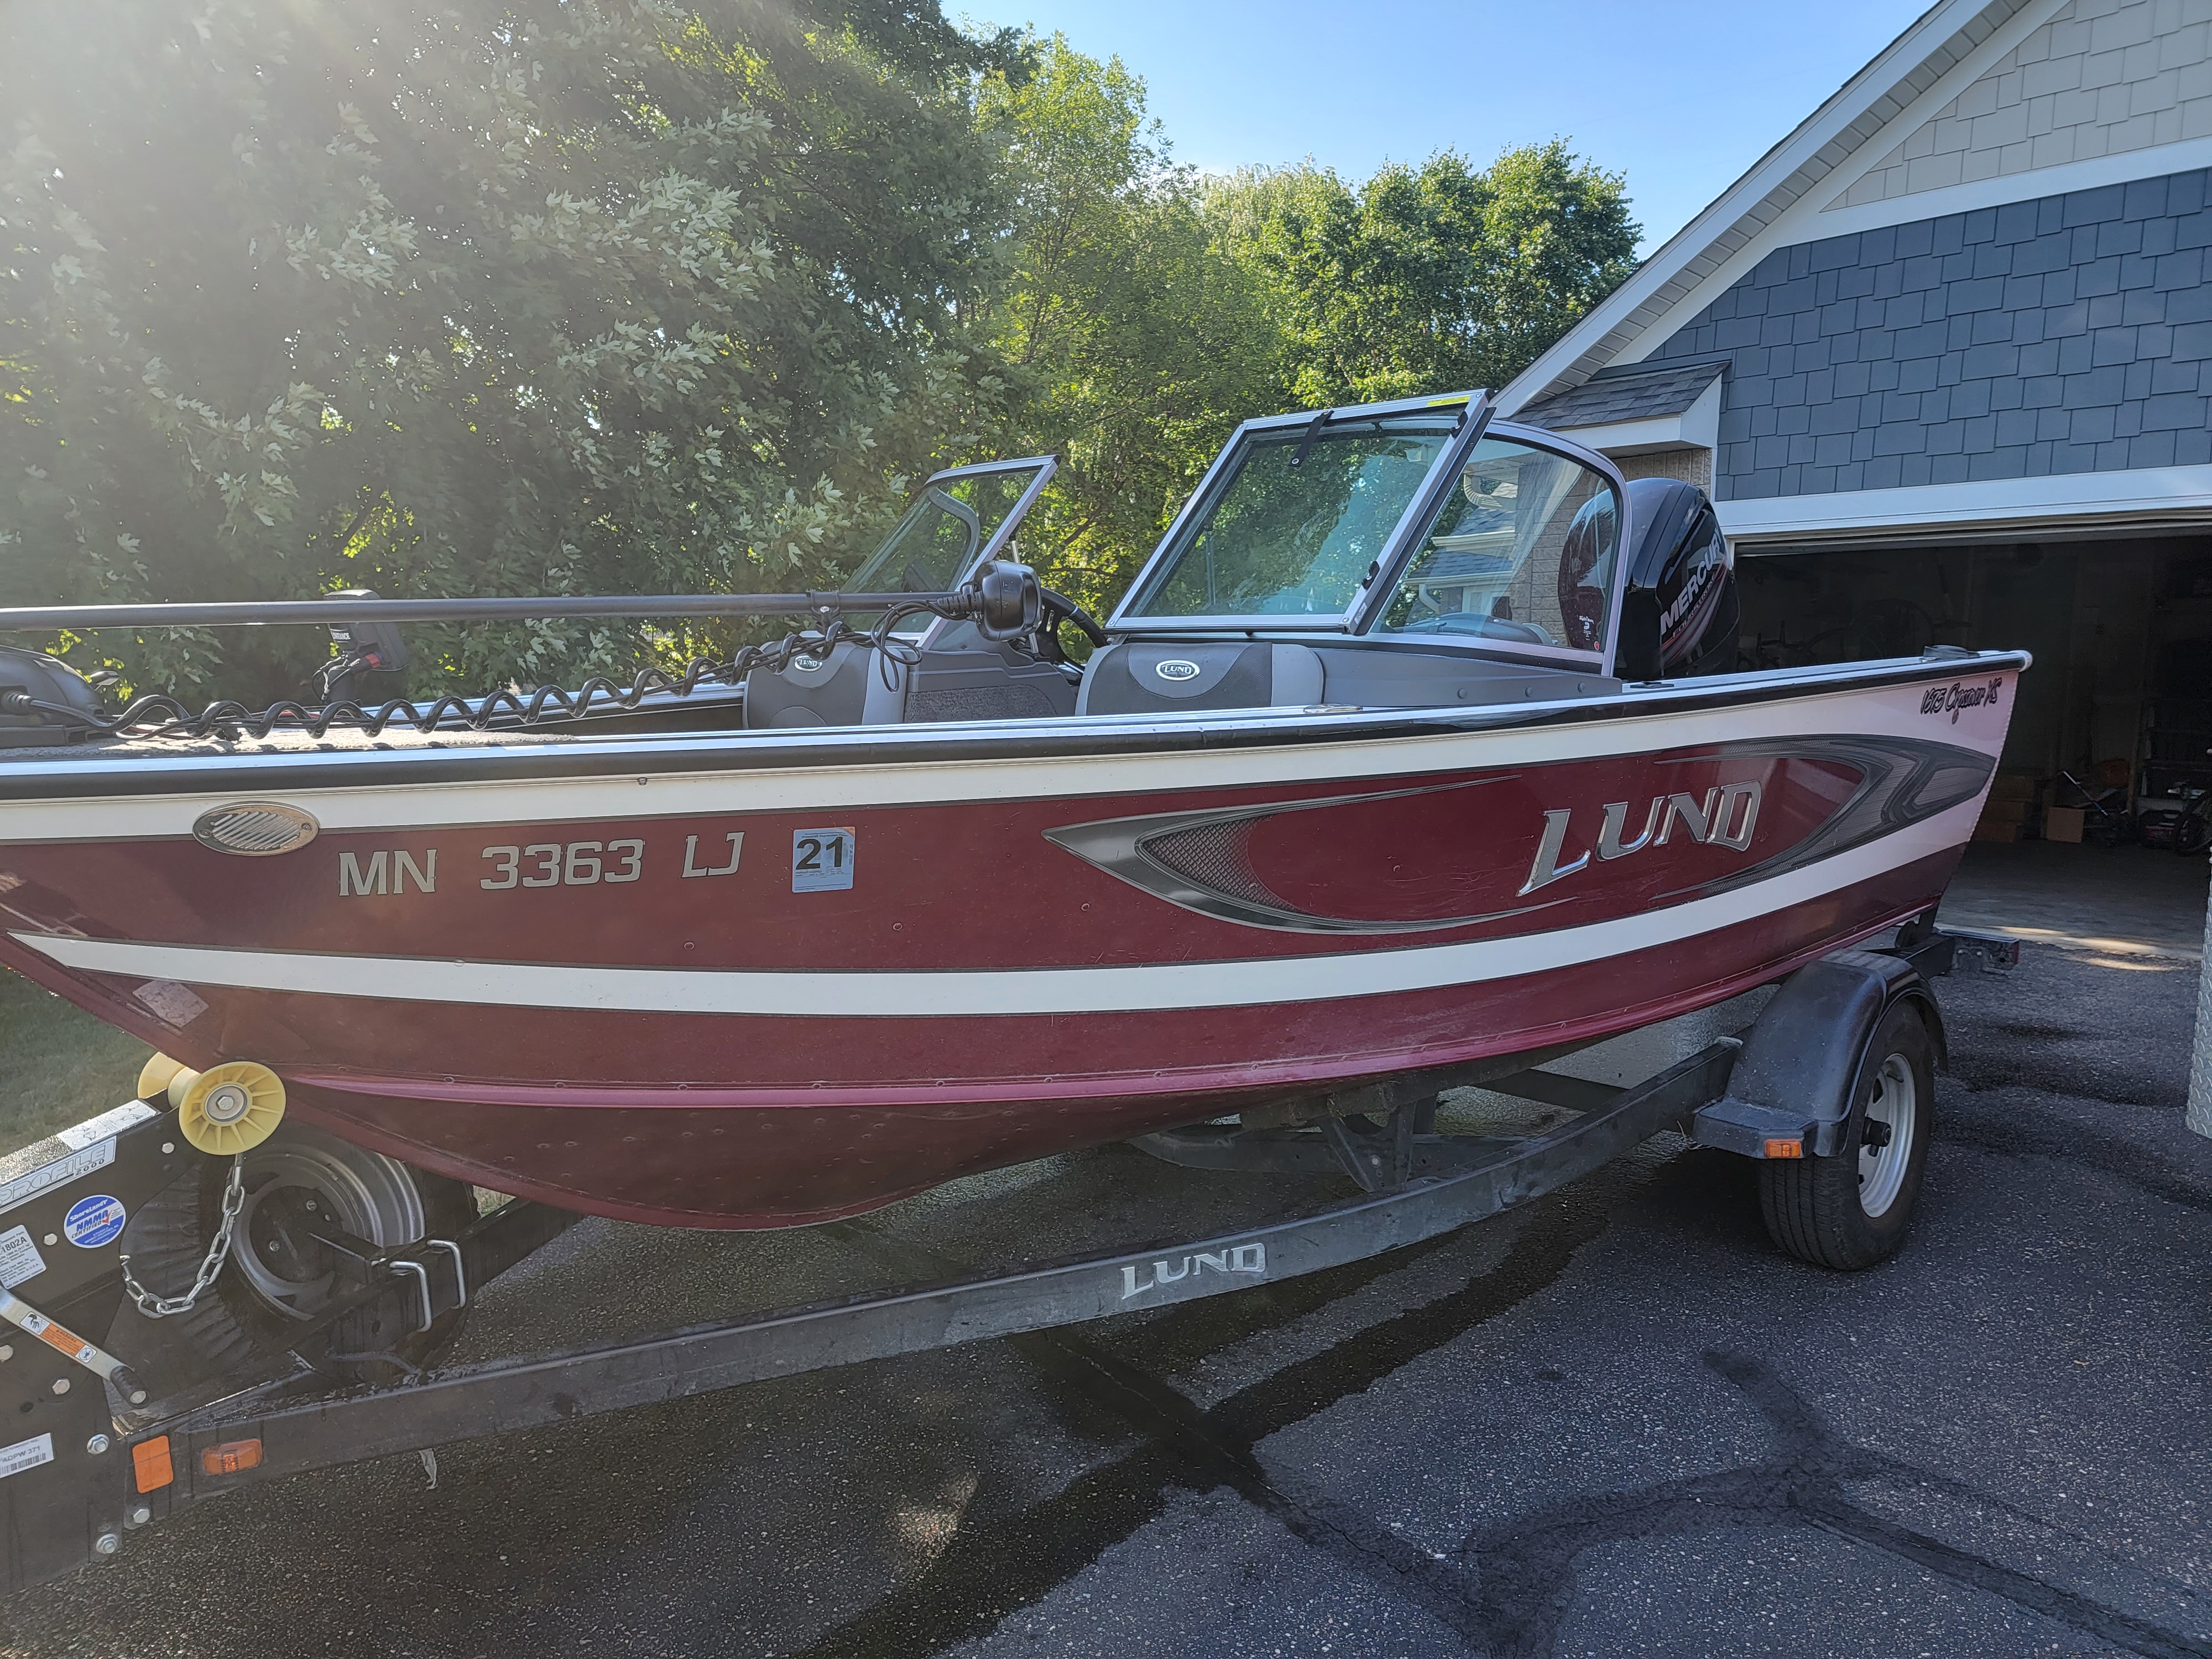 2017 Lund 1675 Crossover XS Fishing boat for sale in Anoka, MN - image 2 